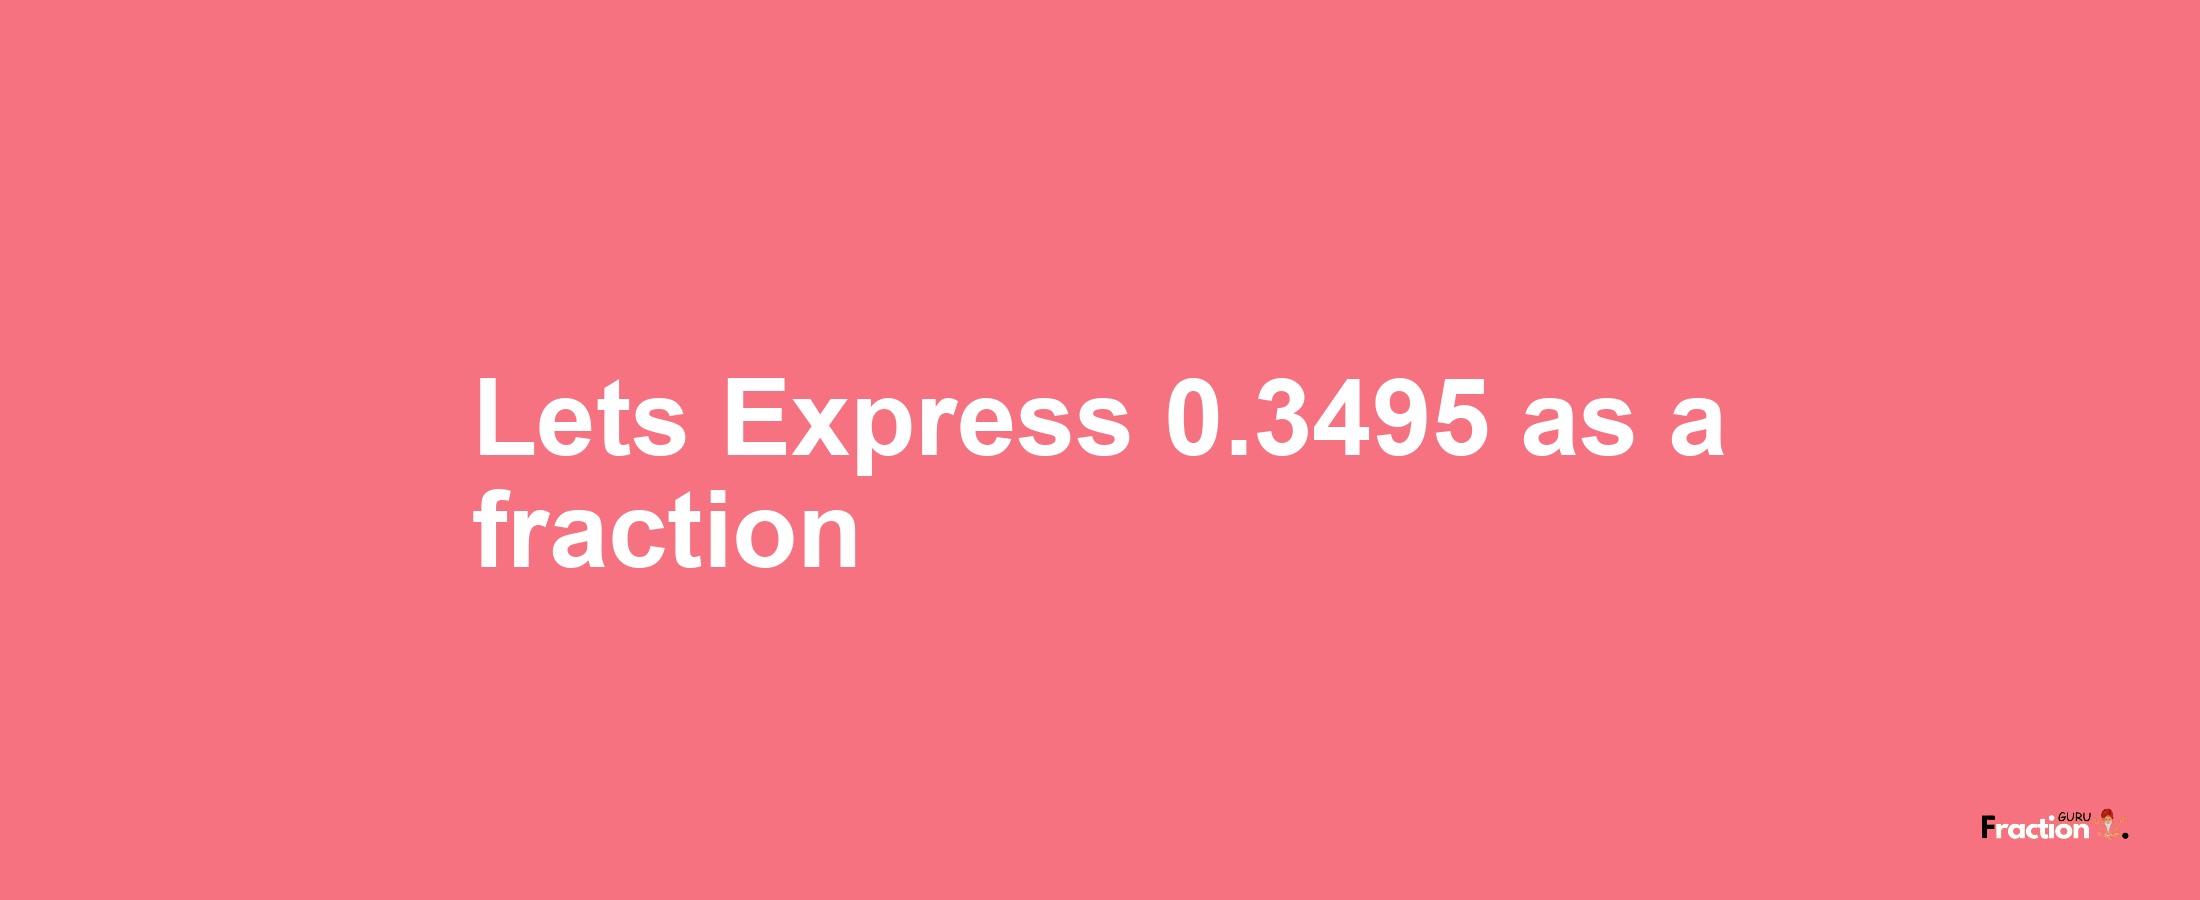 Lets Express 0.3495 as afraction